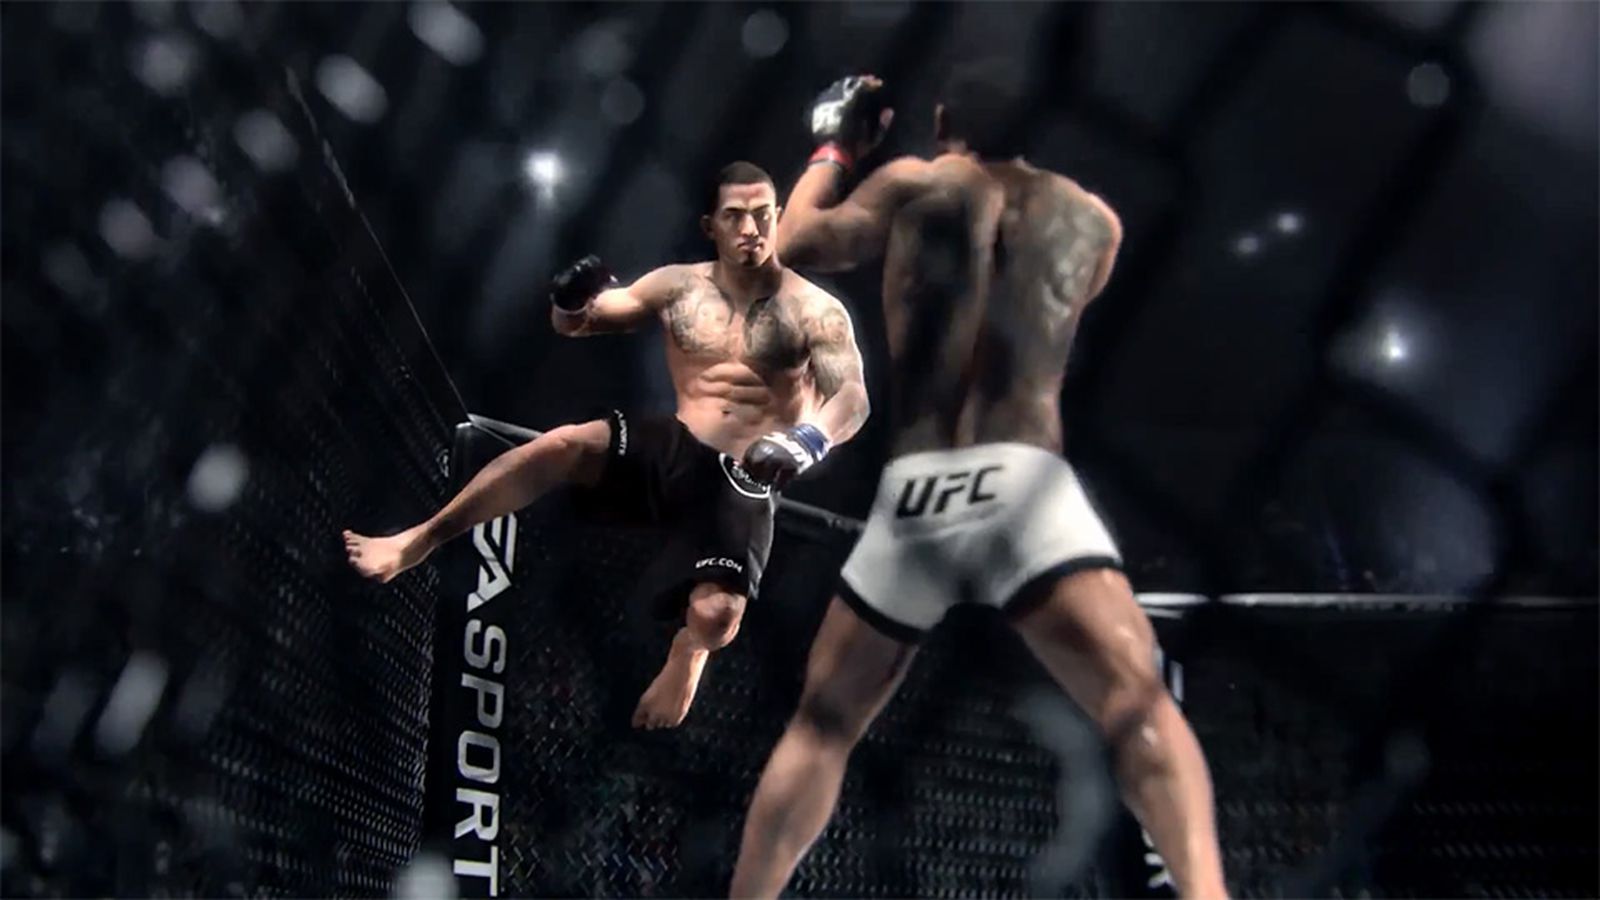 THQ sues UFC and EA over UFC video game license